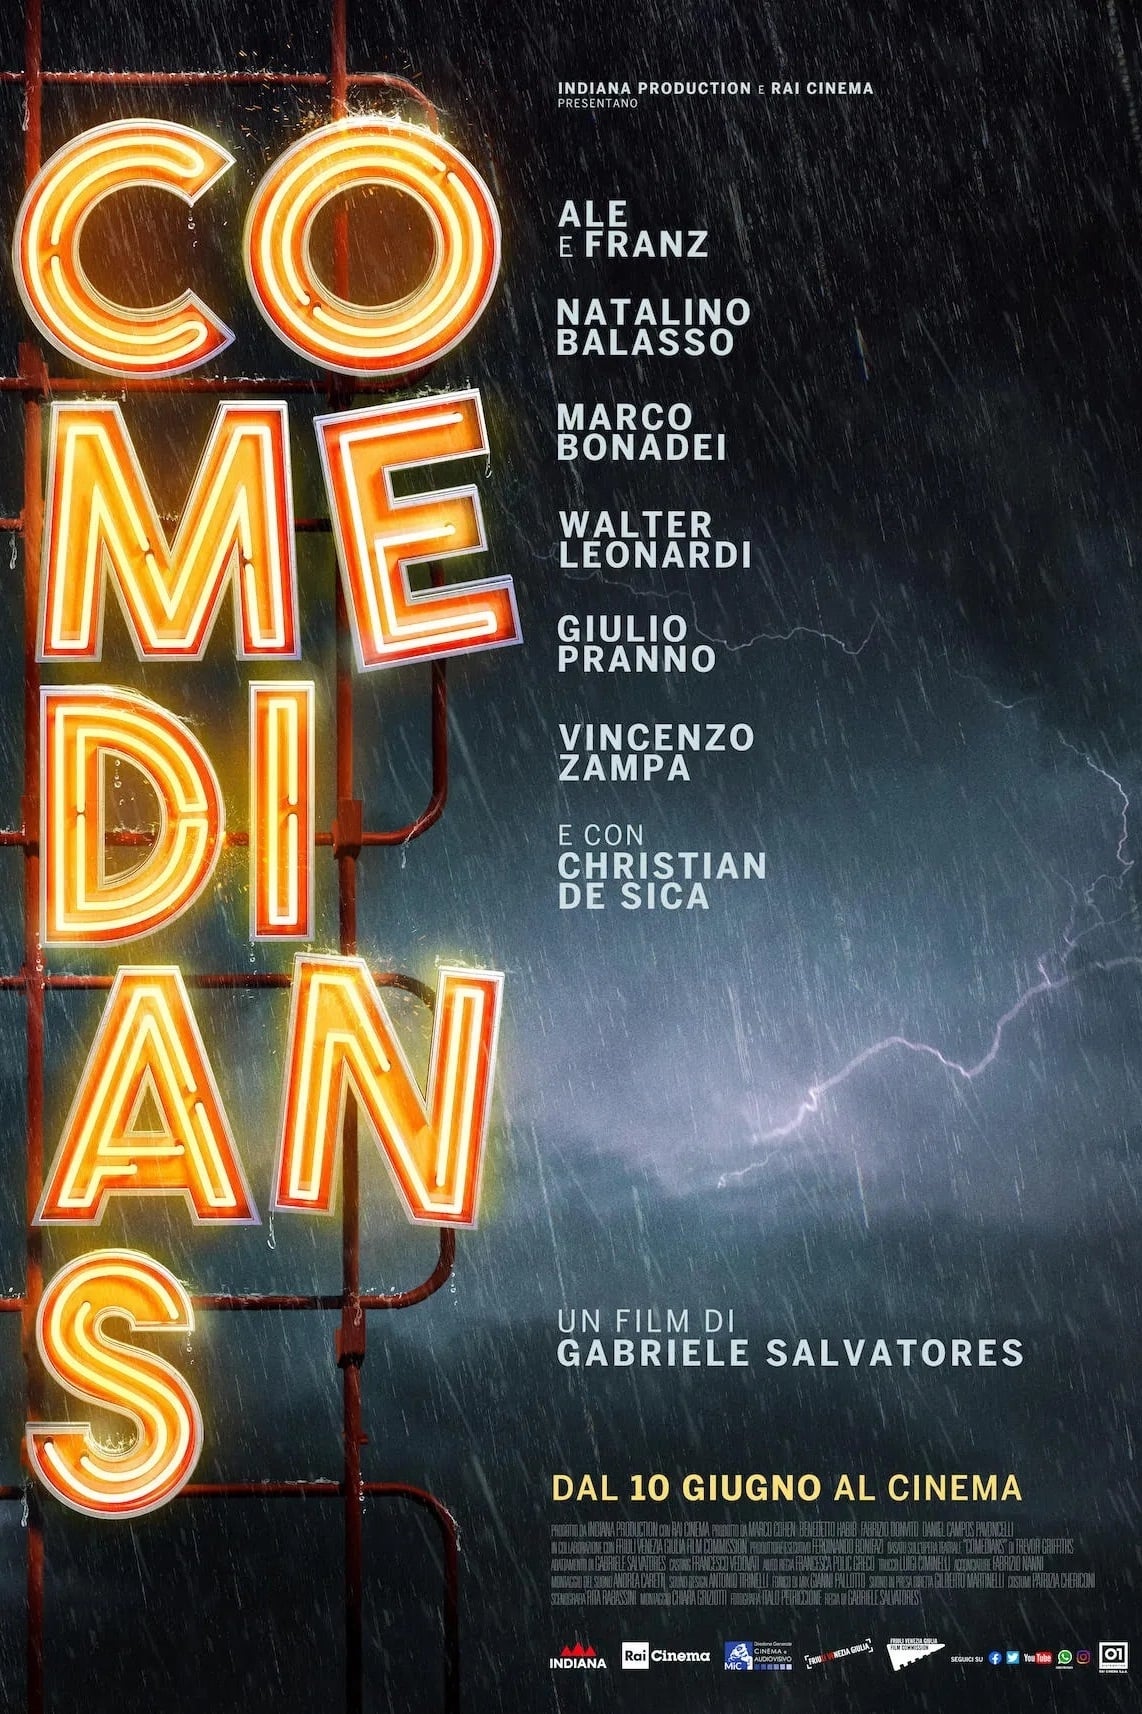 Poster for the movie "Comedians"